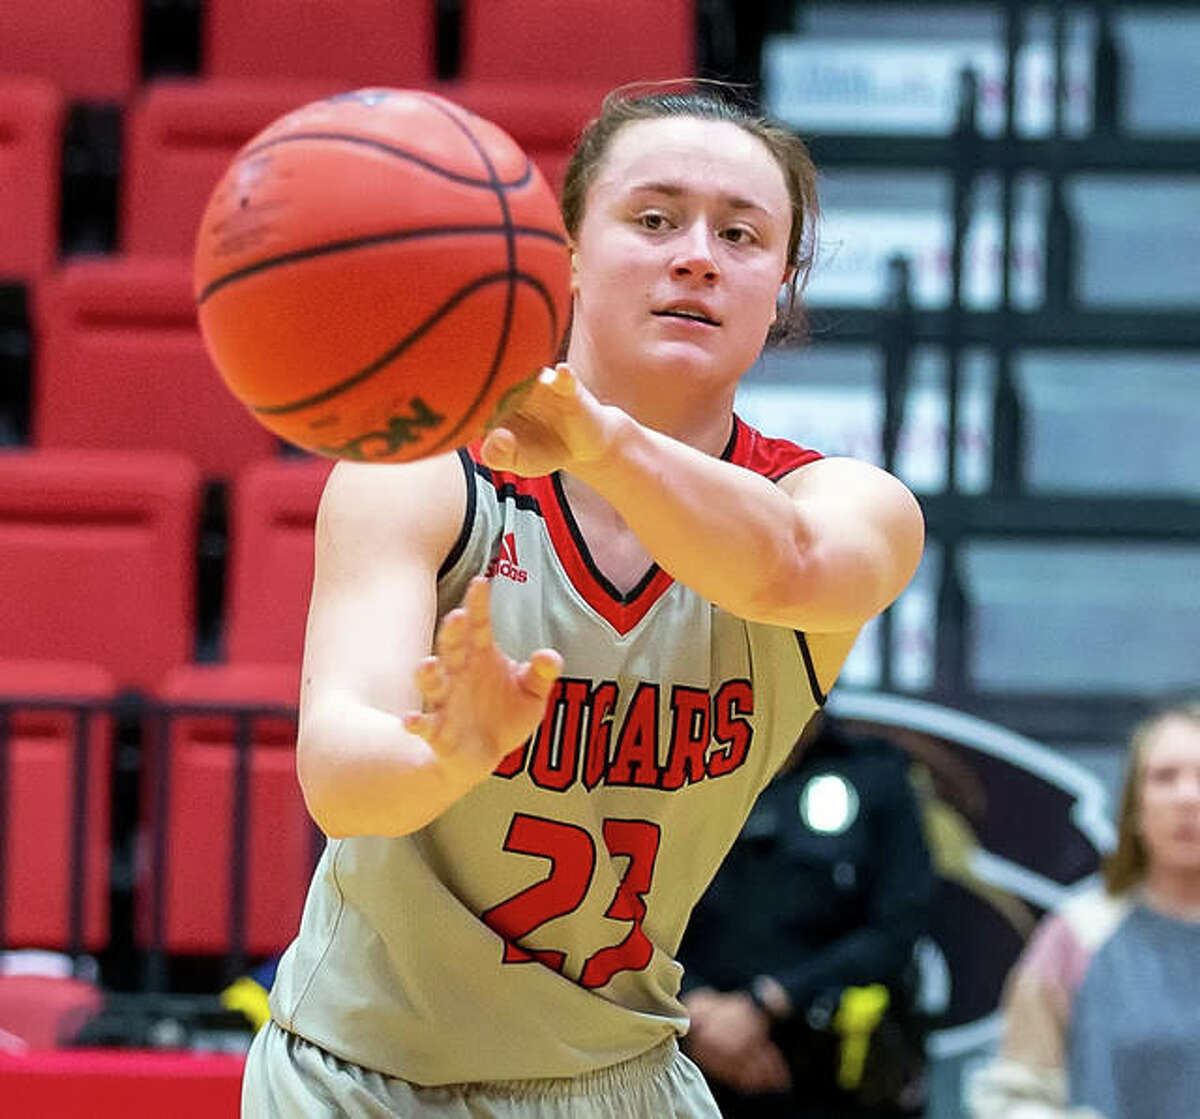 SIUE’s Allie Troeckler passes to a teammate during a game last season at SIUE’s First Community Arena in Edwardsville. Troeckler led the Cougars in scoring at 10.8 points per game as a junior.